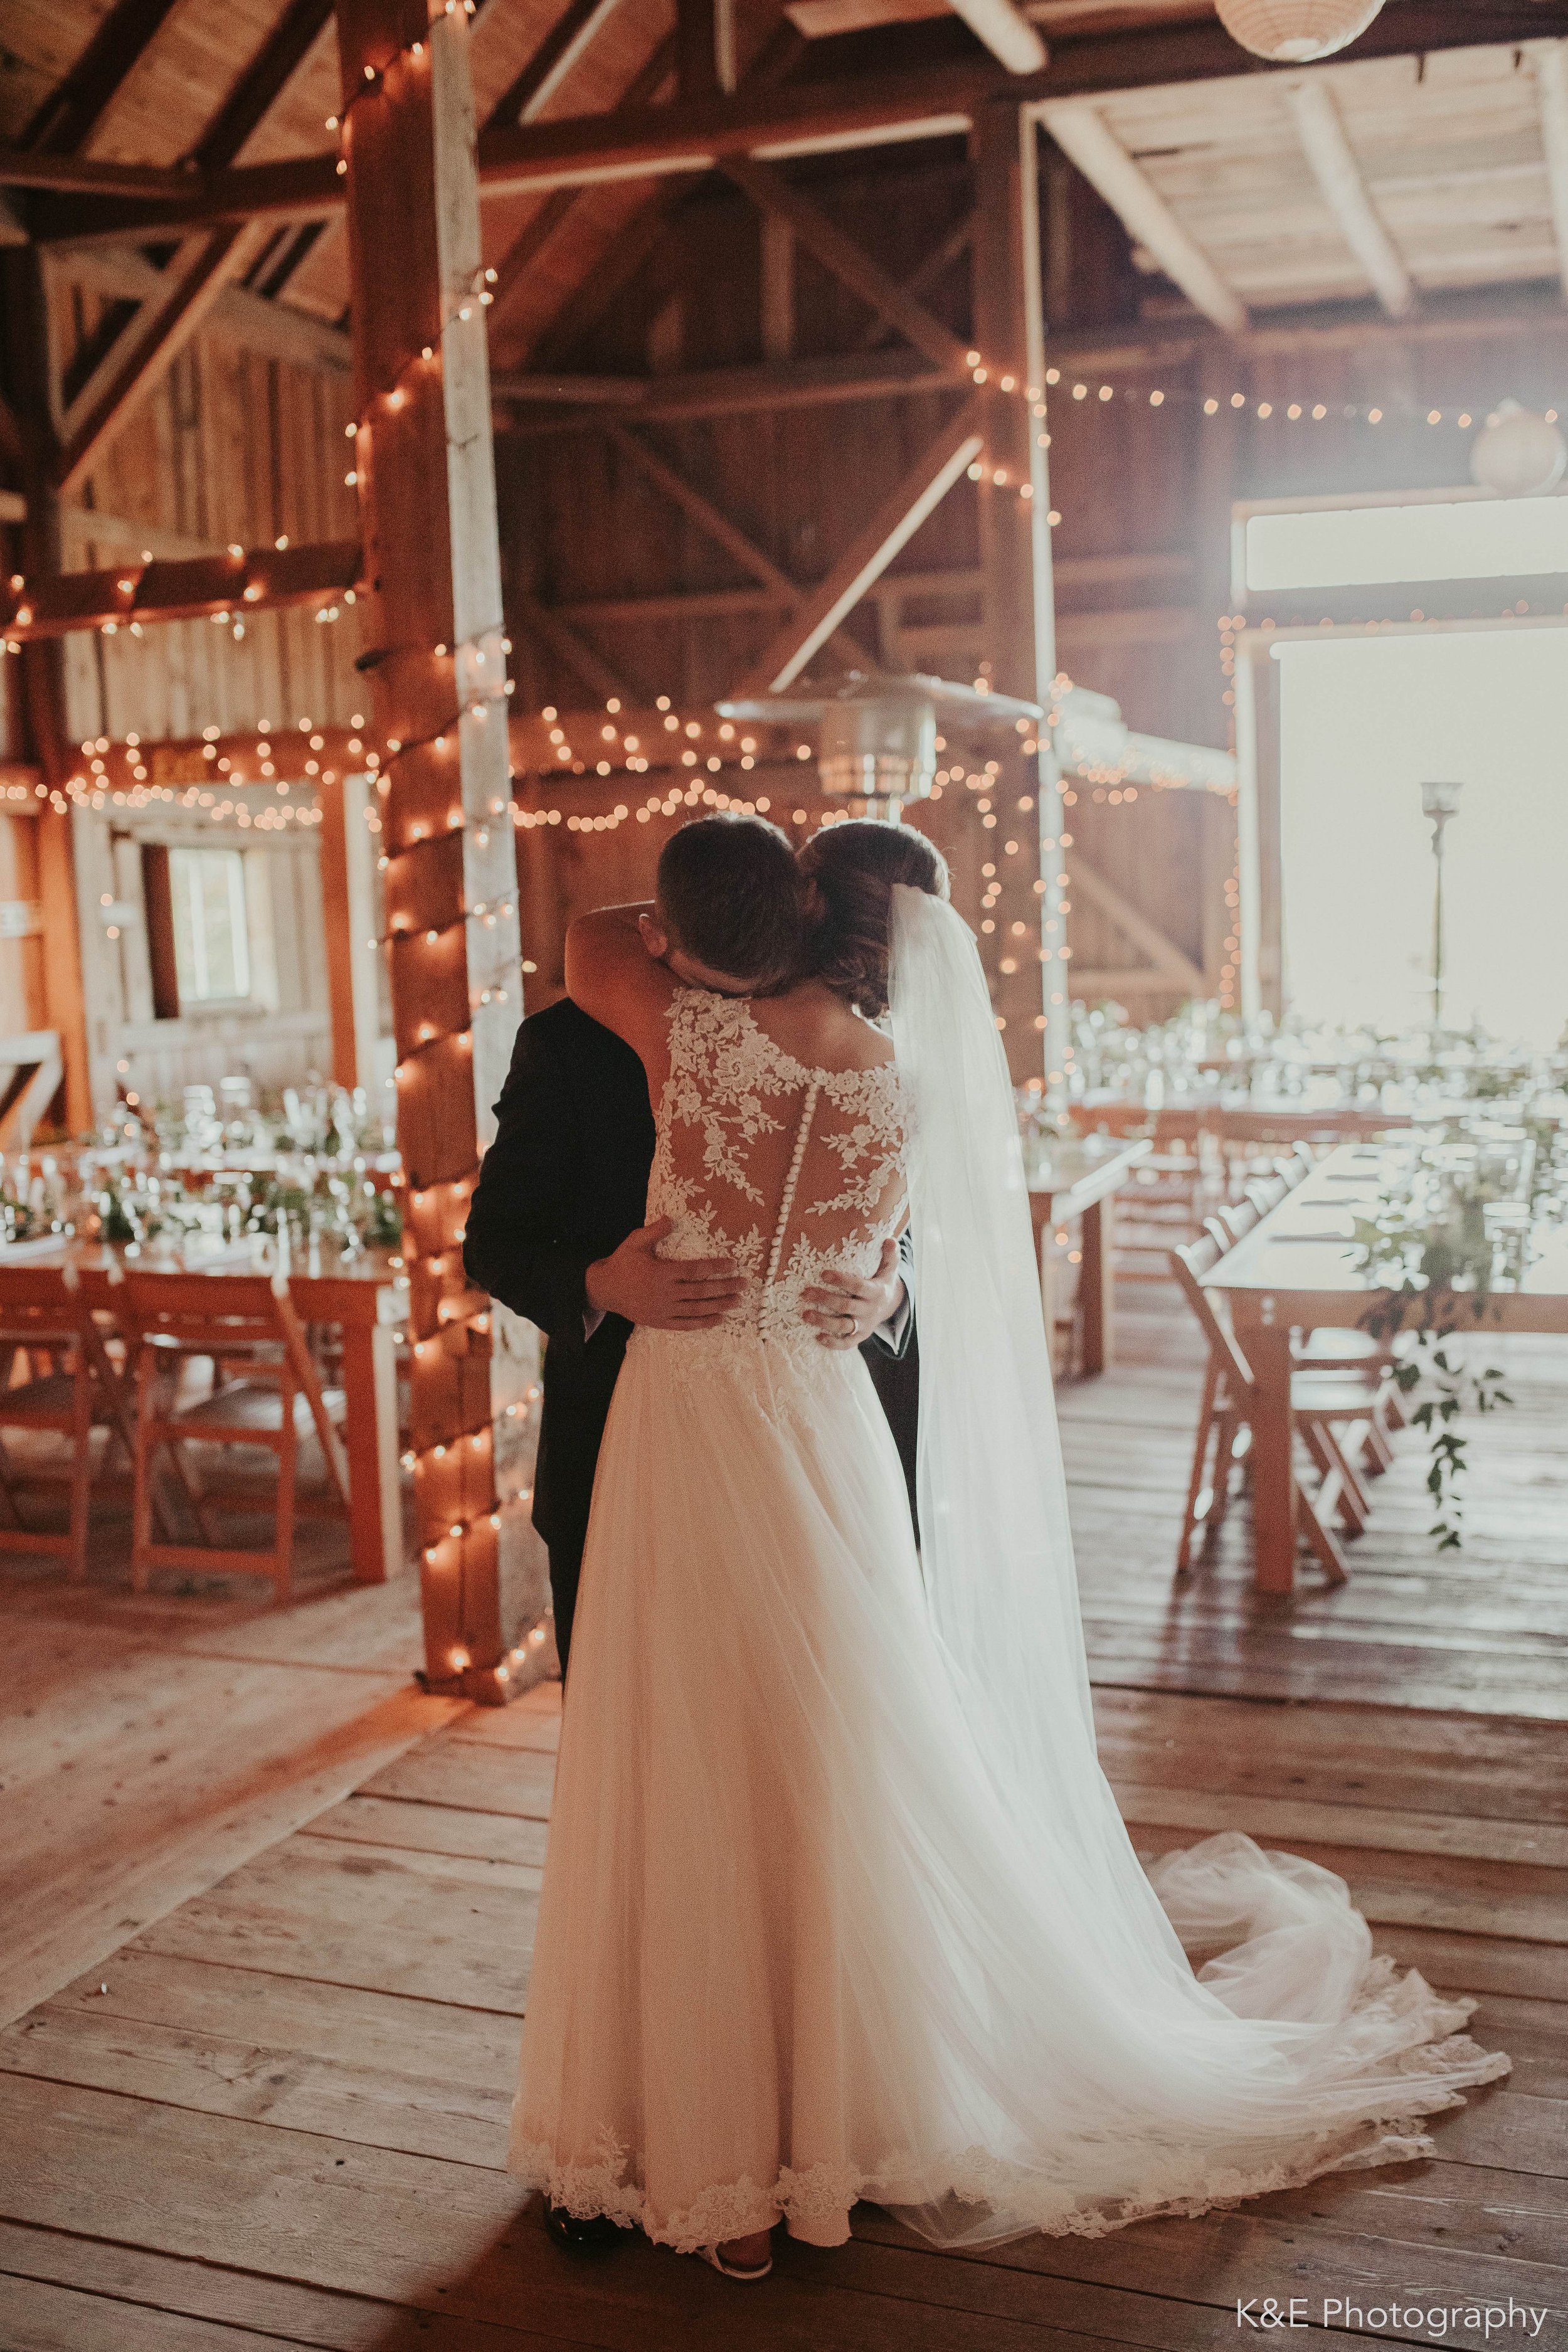 First wedding dance in the barn lit with twinkle lights